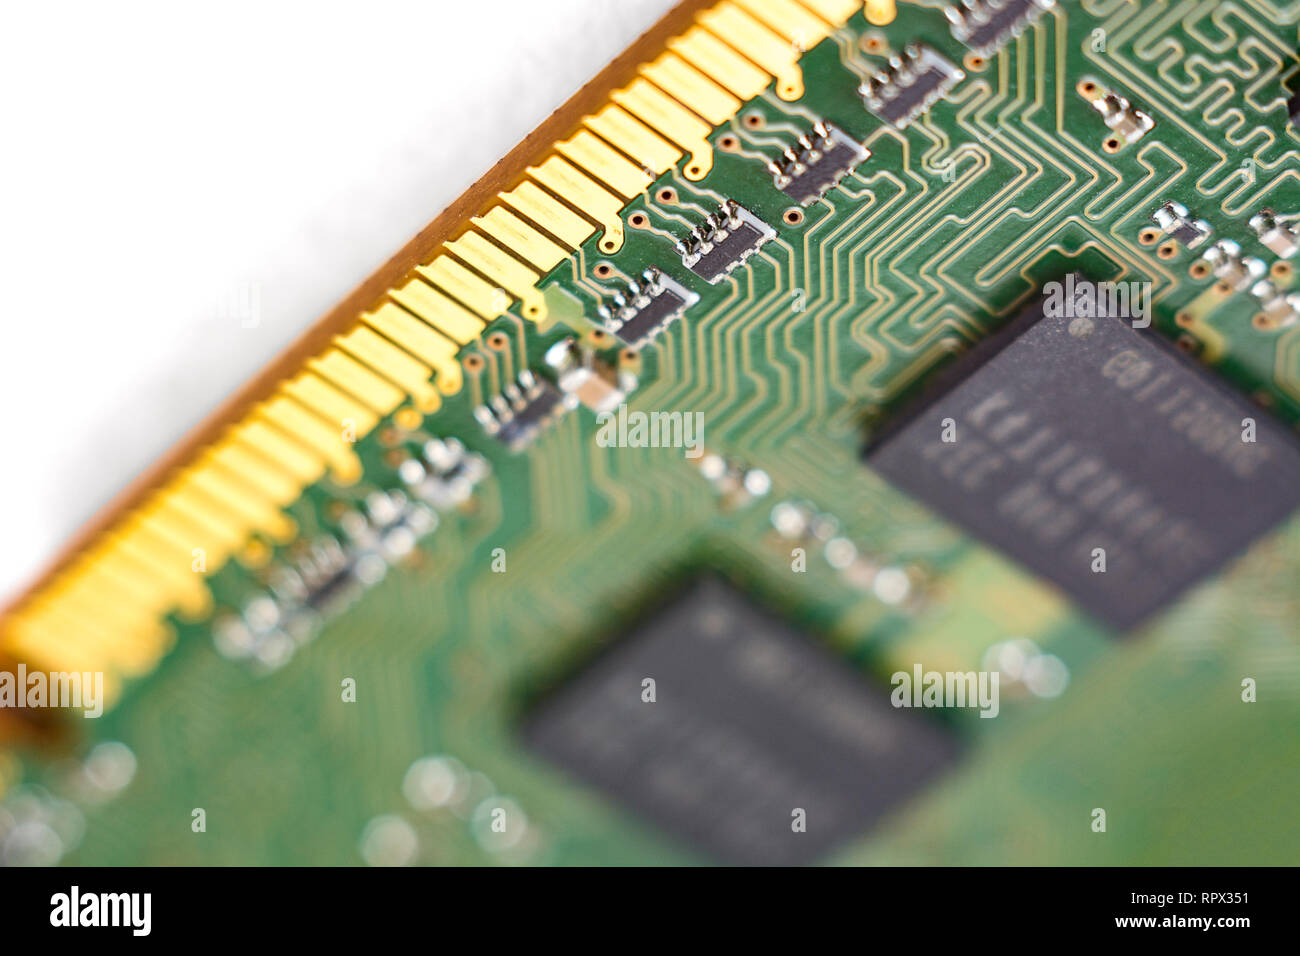 computer RAM, system memory, main memory, random access memory, internal memory, onboard, computer detail, close-up, high resolution, isolated on whit Stock Photo